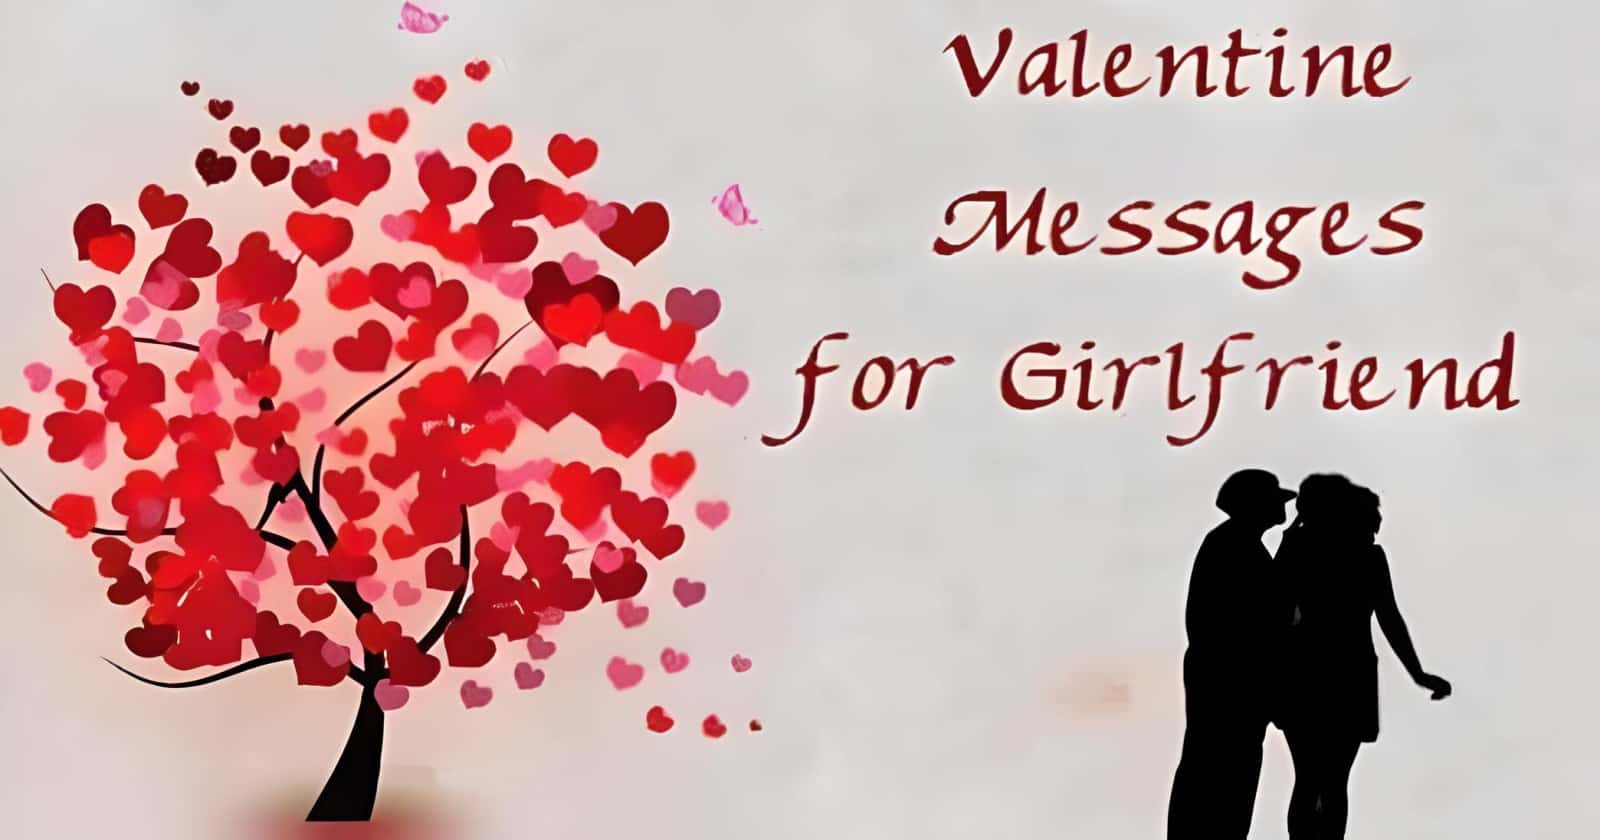 Romantic Valentine's Day Messages for Girlfriends